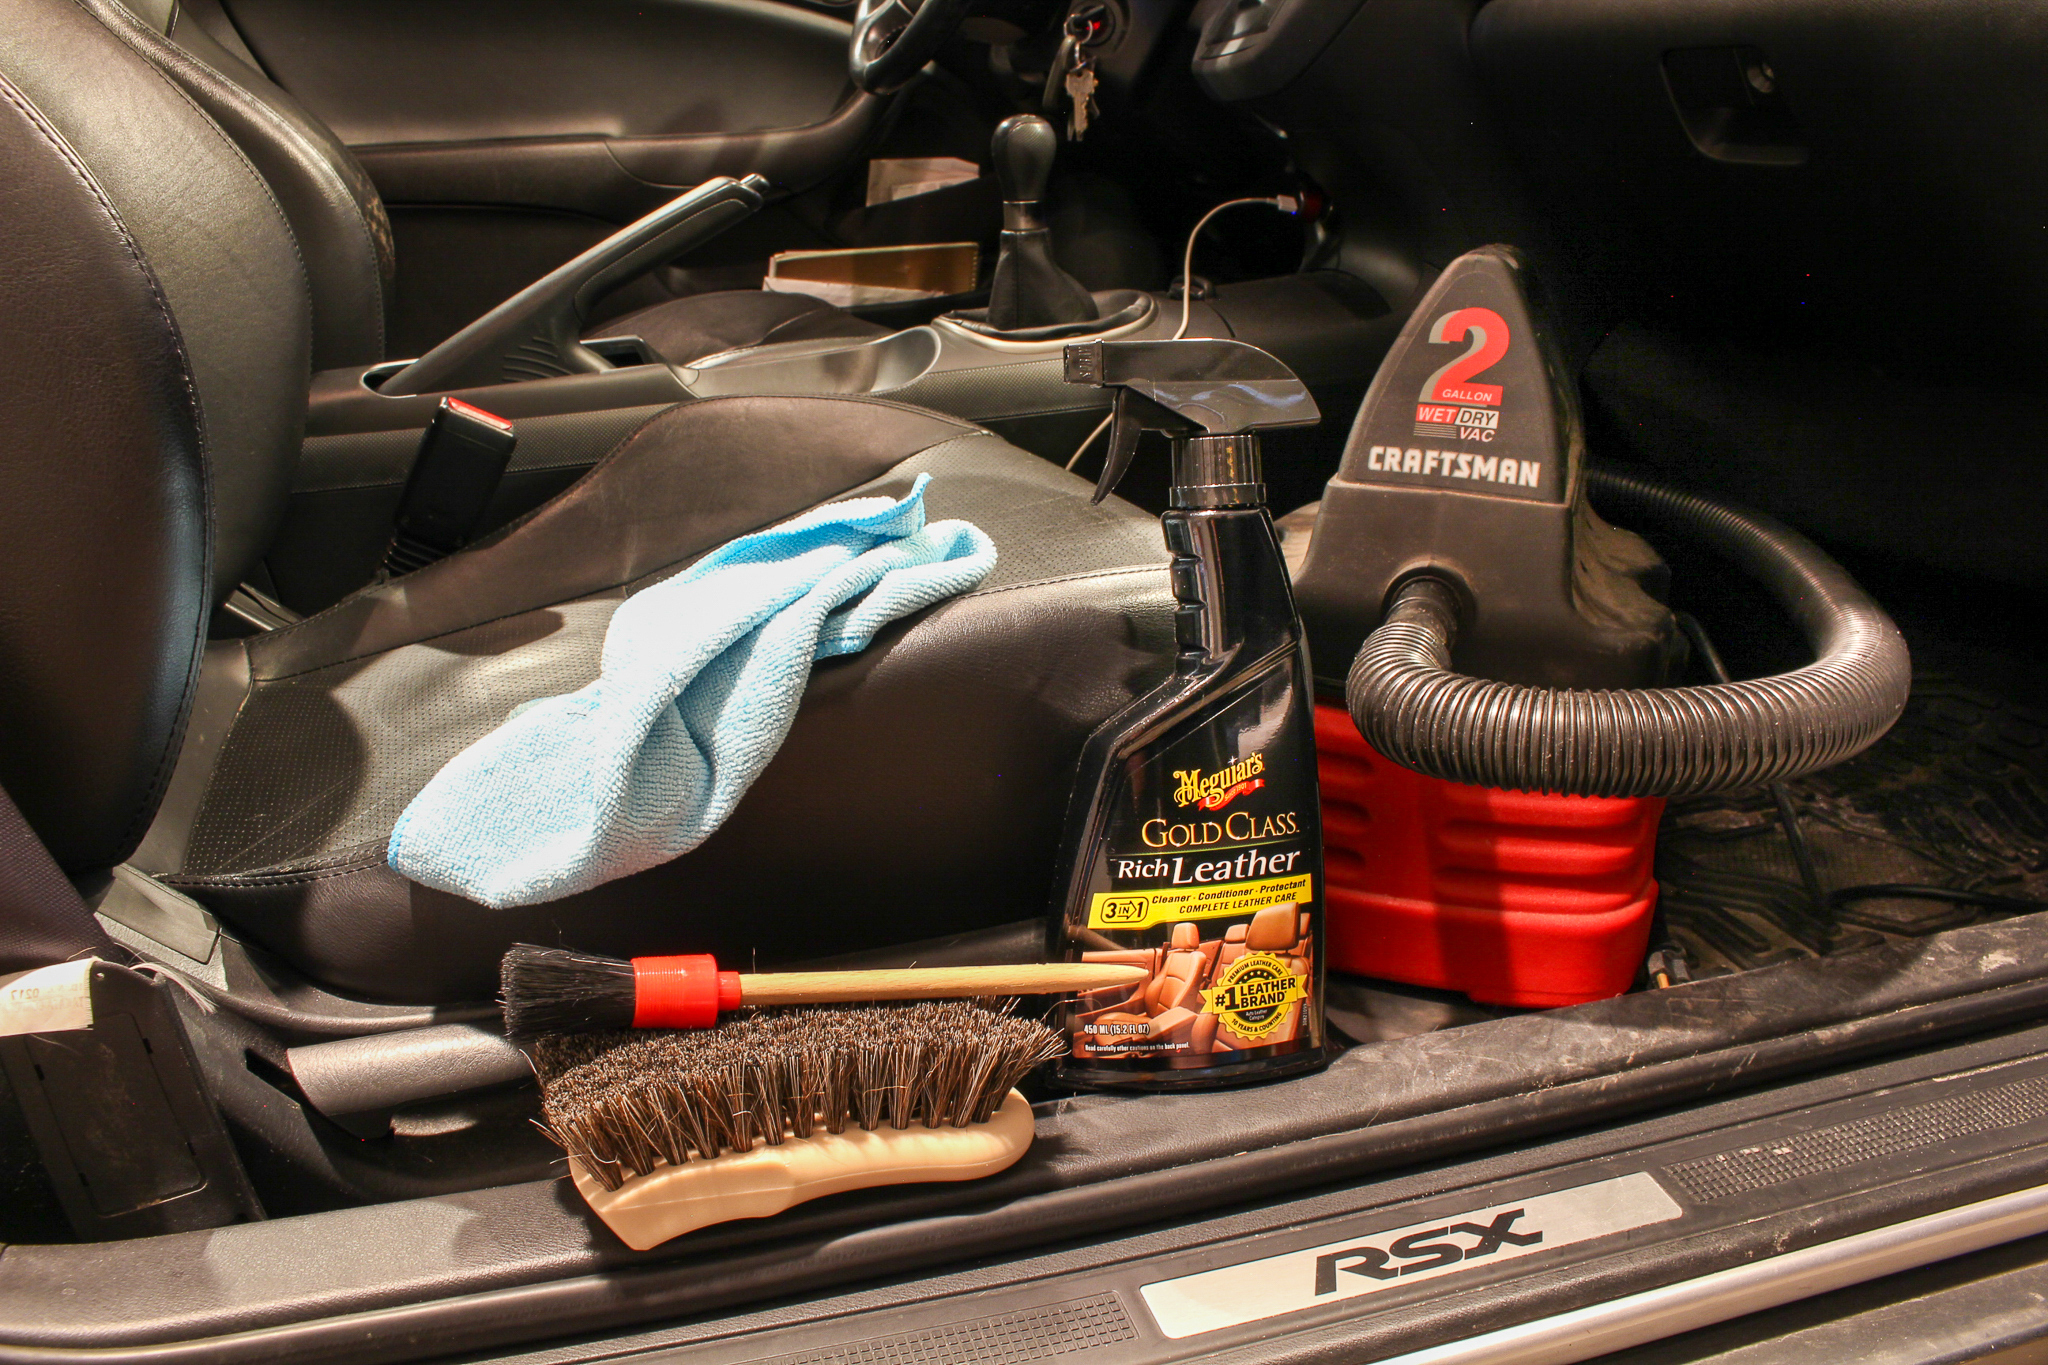 leather seat cleaning